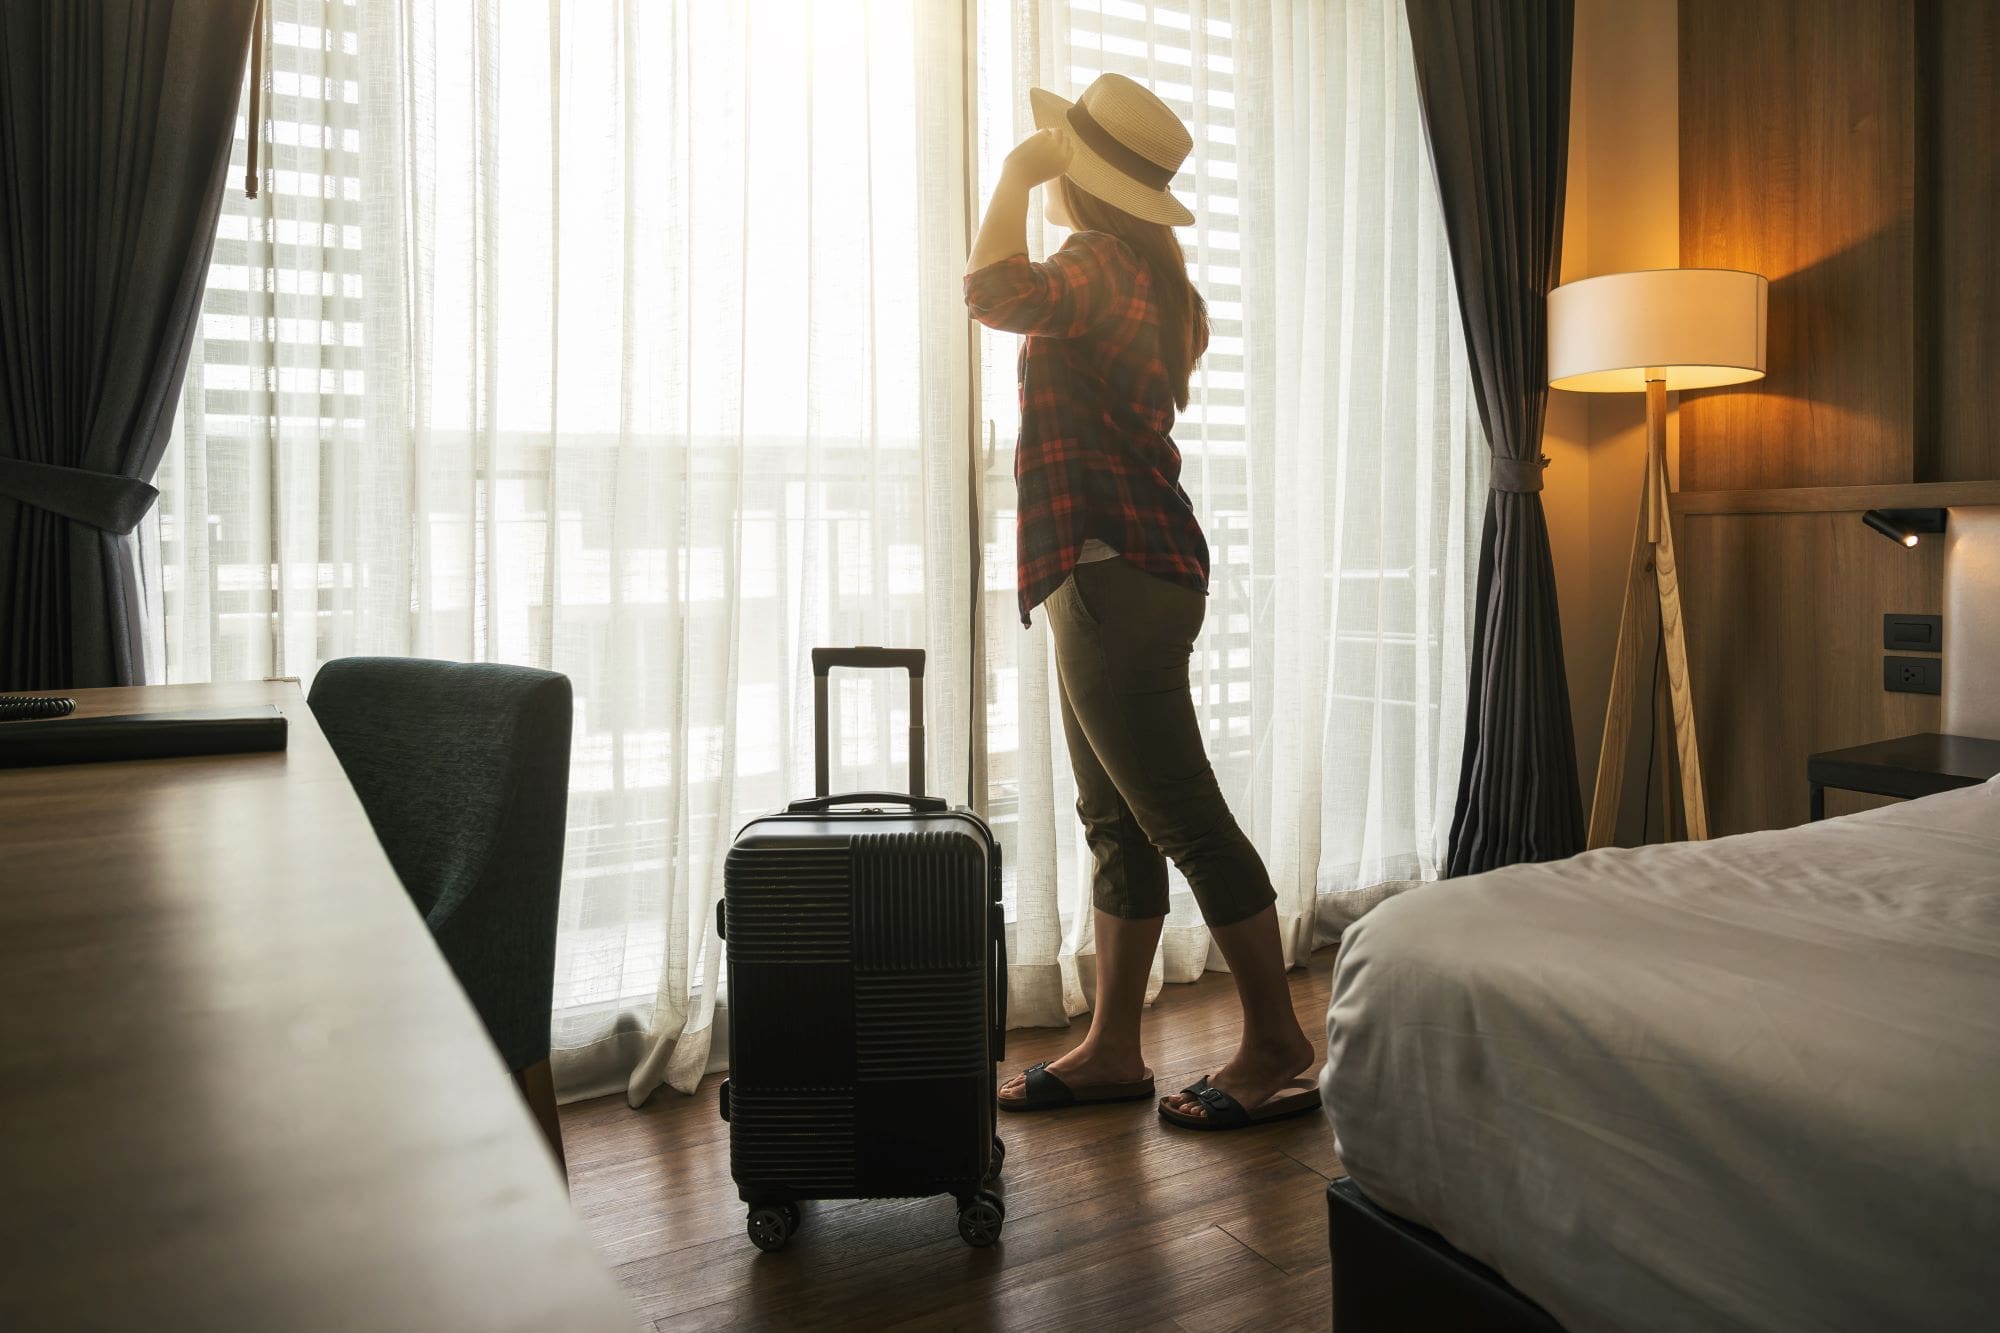 How to Find Affordable Accommodation and Transportation When Traveling